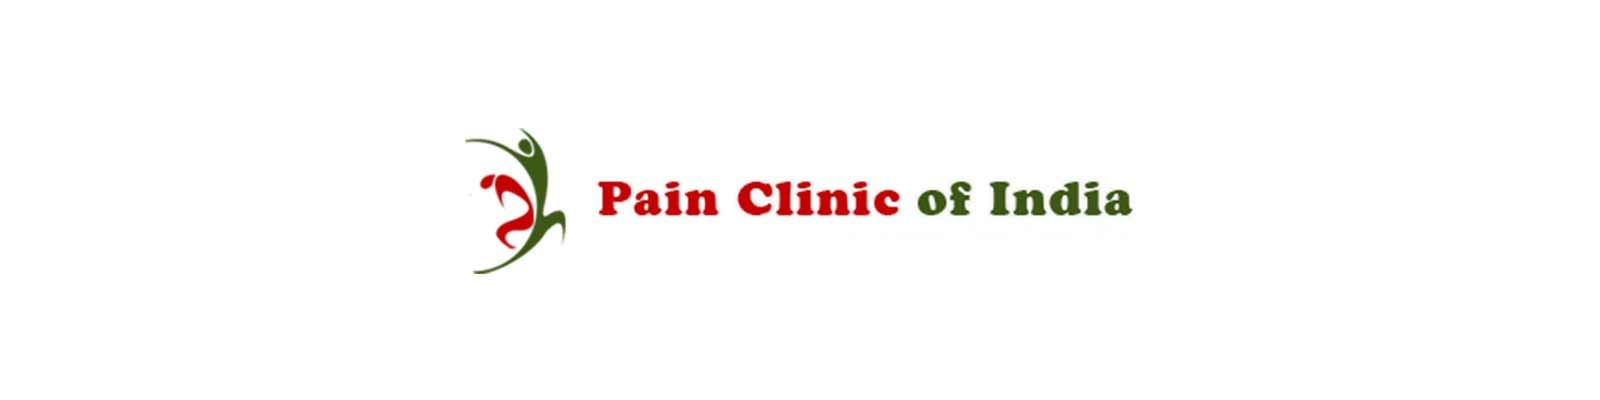 Pain Clinic of India